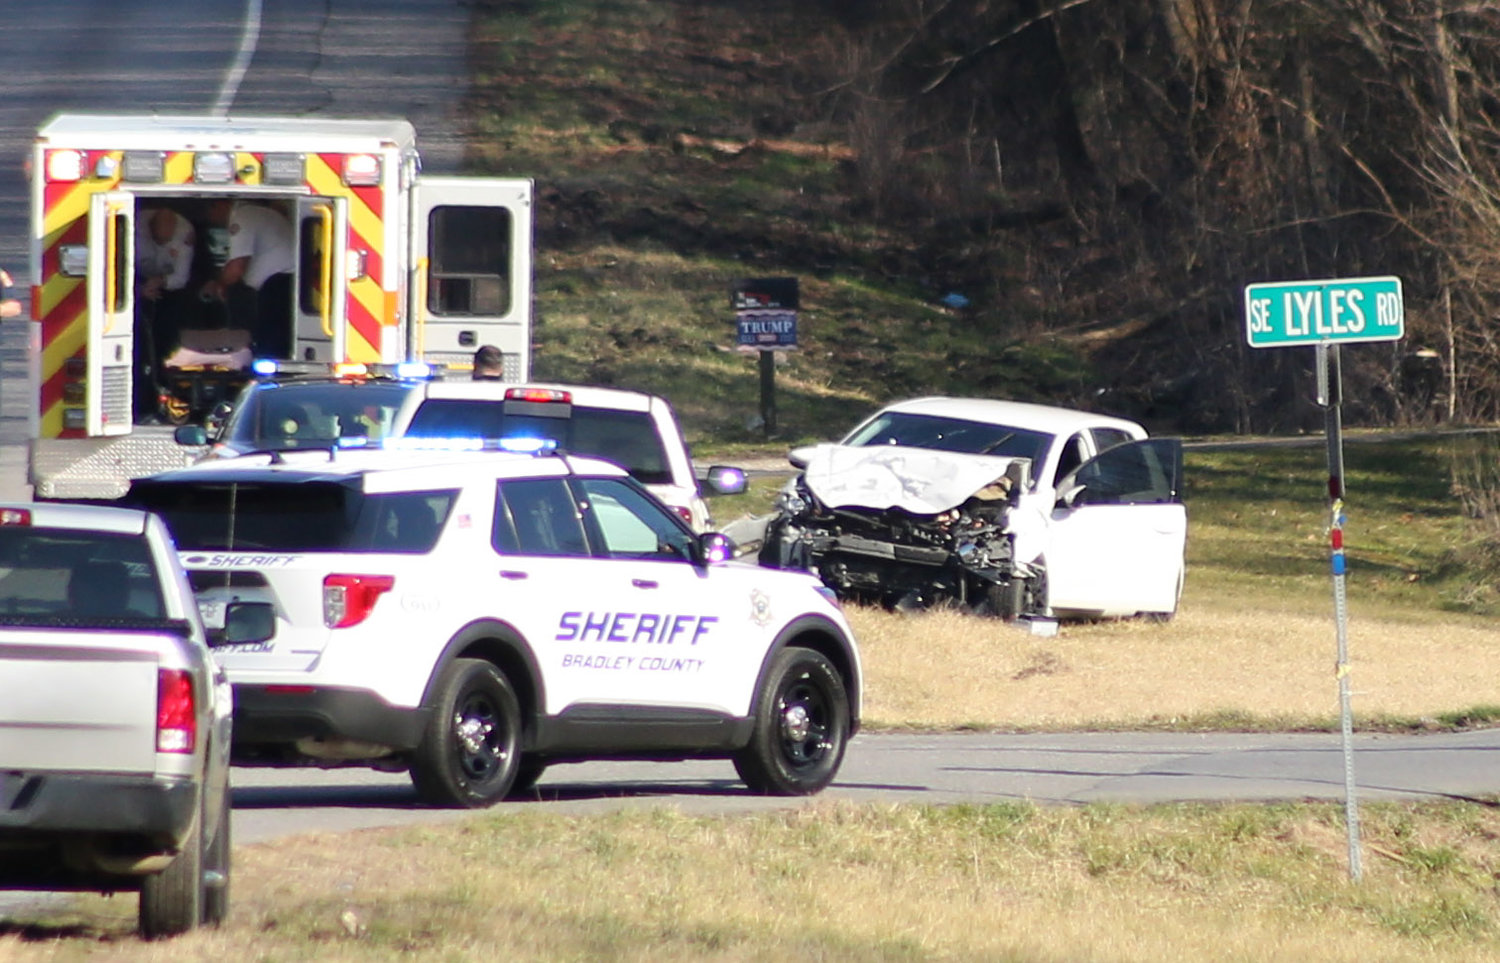 BULLETIN Cleveland woman dies in 2vehicle crash on Highway 64 The